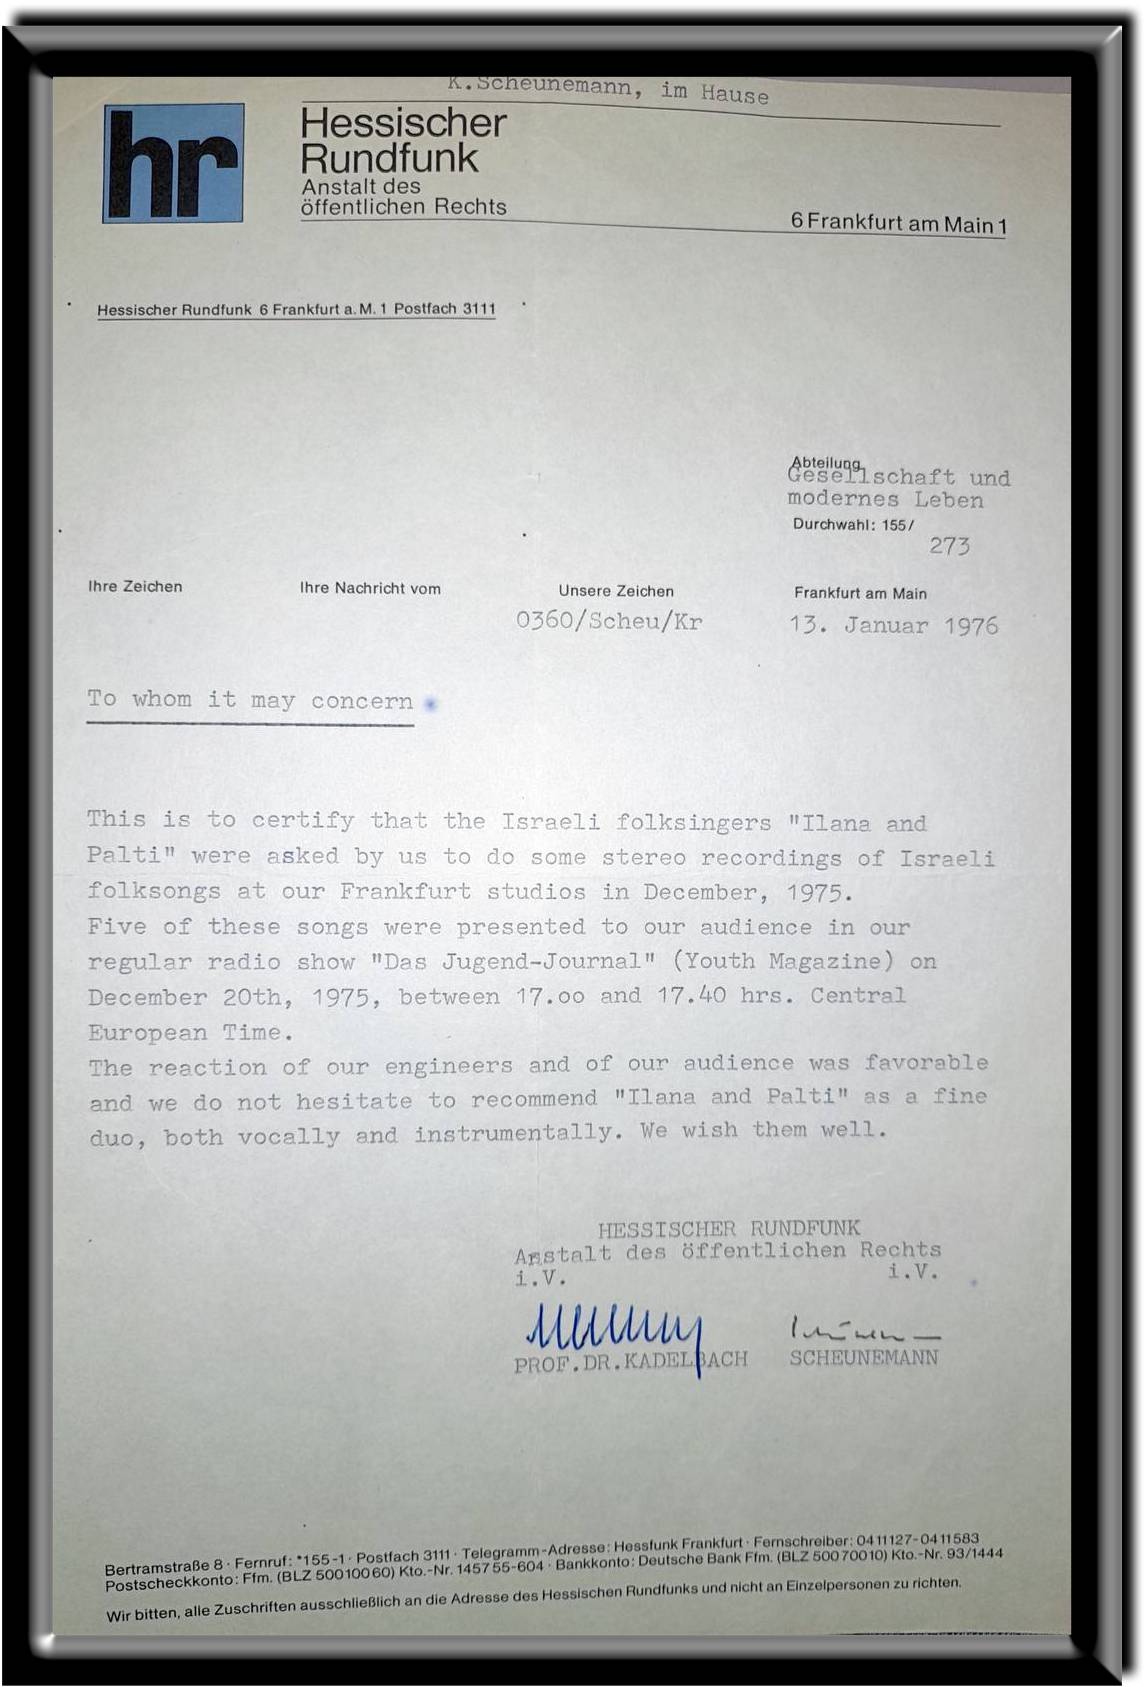 Letter of recommendation by Prof. Dr. Kadelbach, Hessischer Rundfunk of January, 1976.